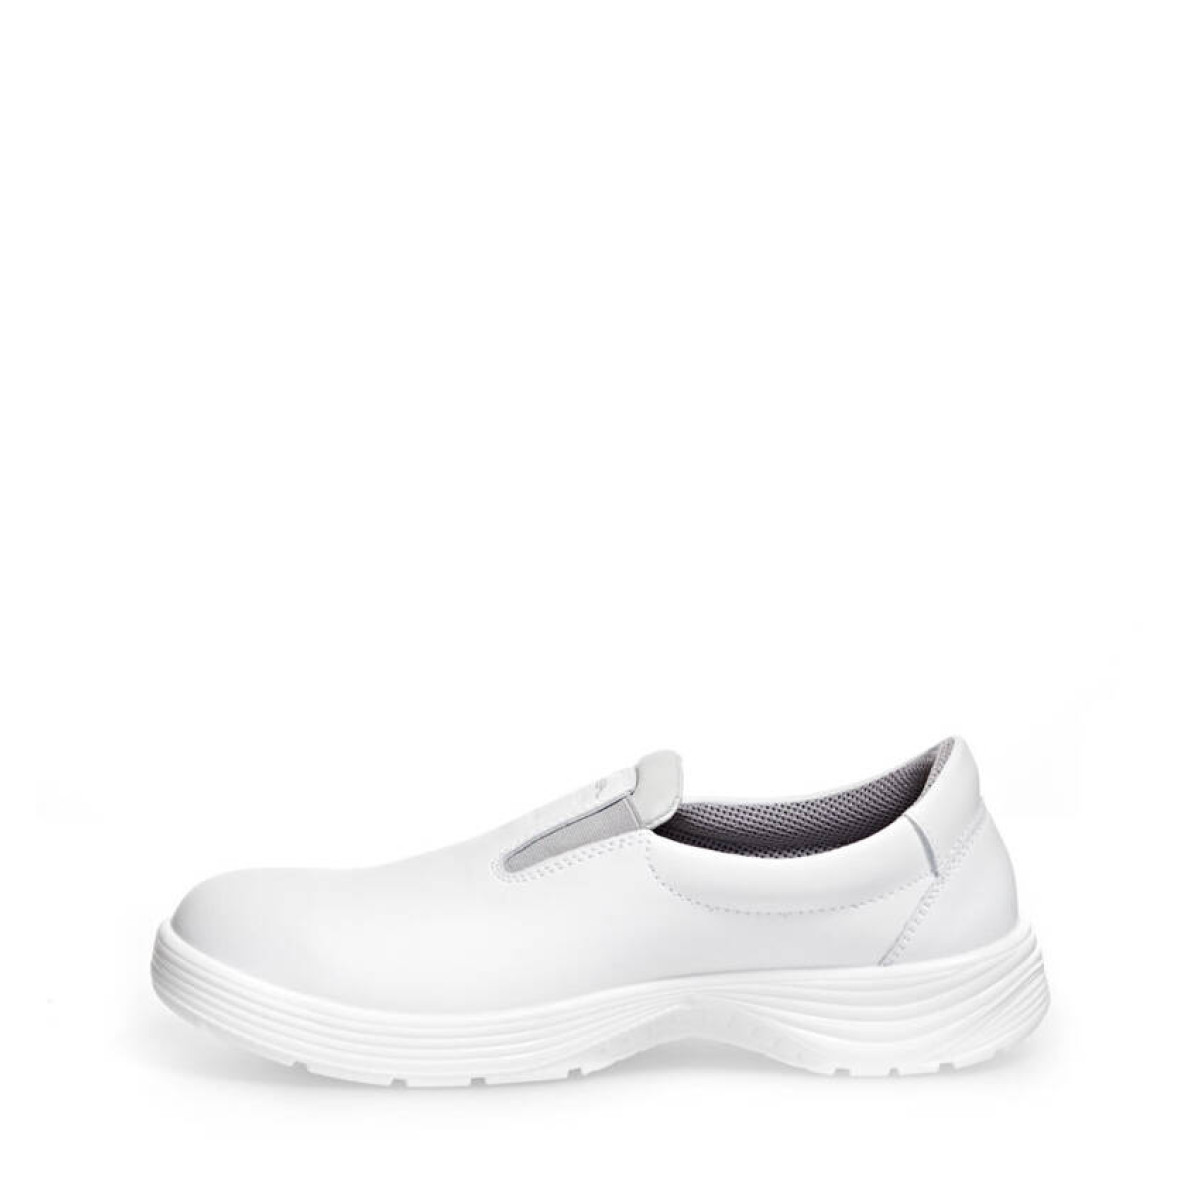 Color:white with steel cap, Size:47